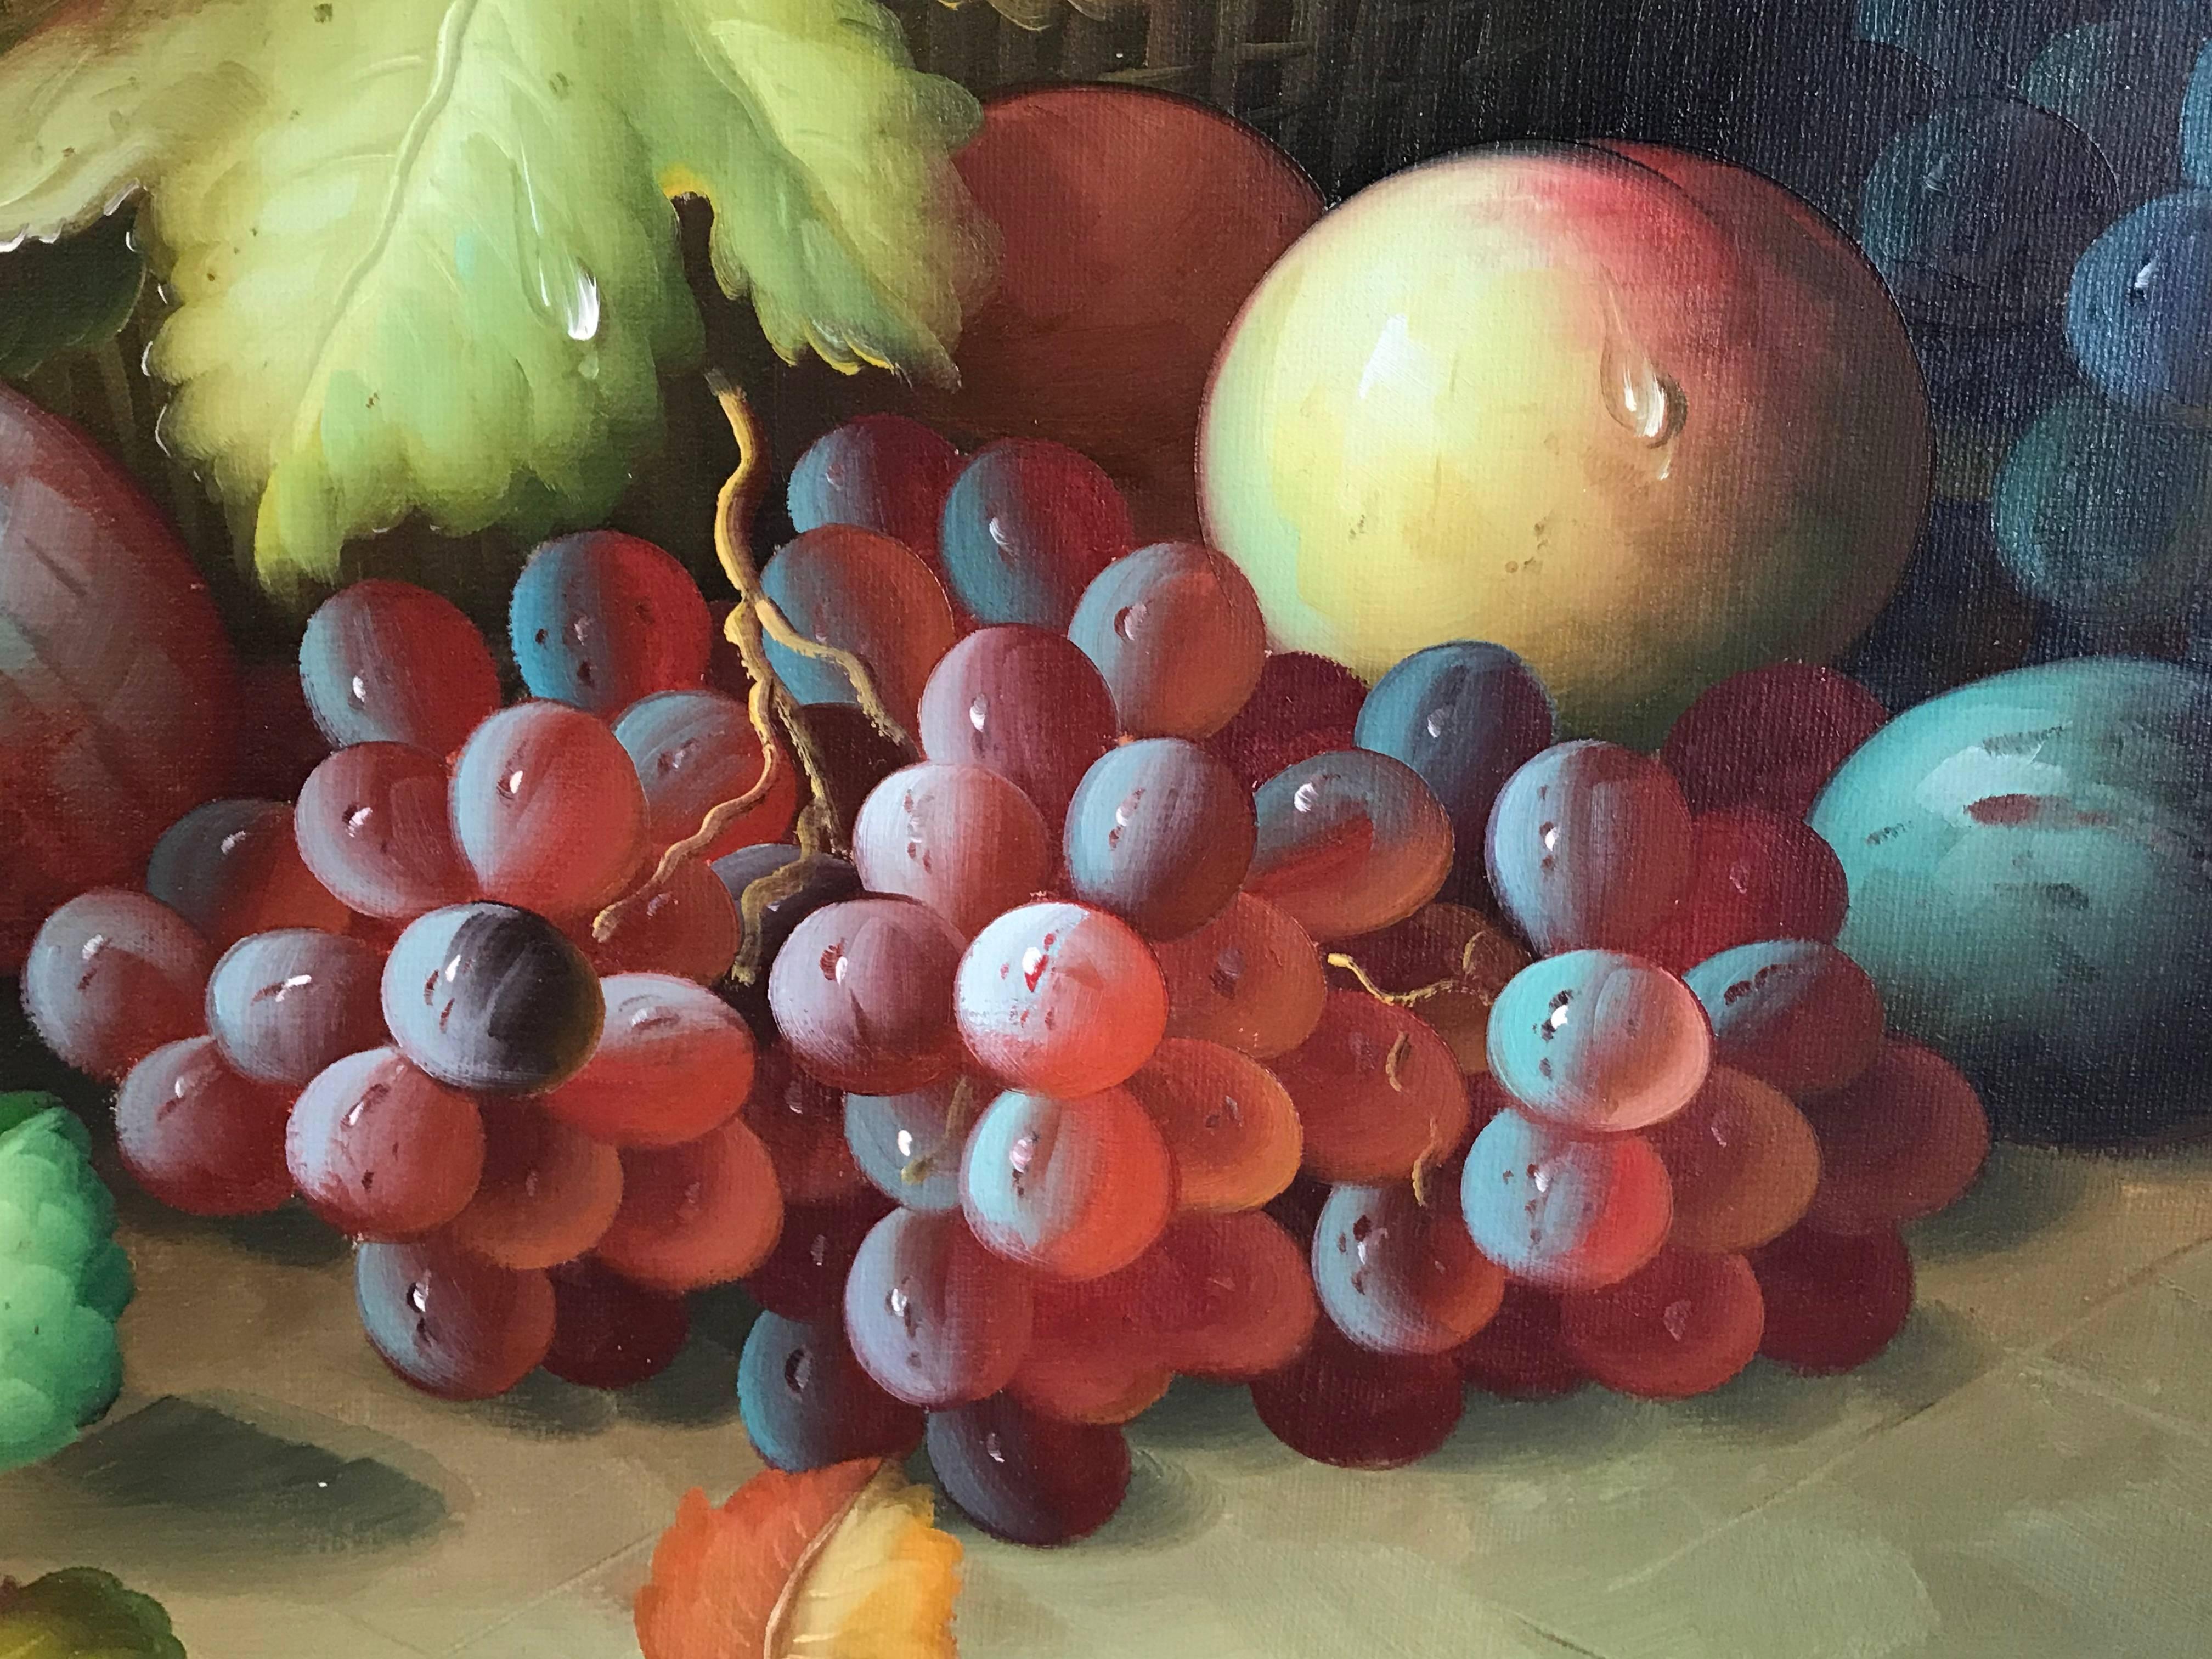 Continental School, late 20th century
oil painting on canvas, framed
framed size: 30 x 42 inches

Beautiful large scale still life oil painting on canvas, depicting this classical and ornamental arrangement of fruit. The work is very much in the